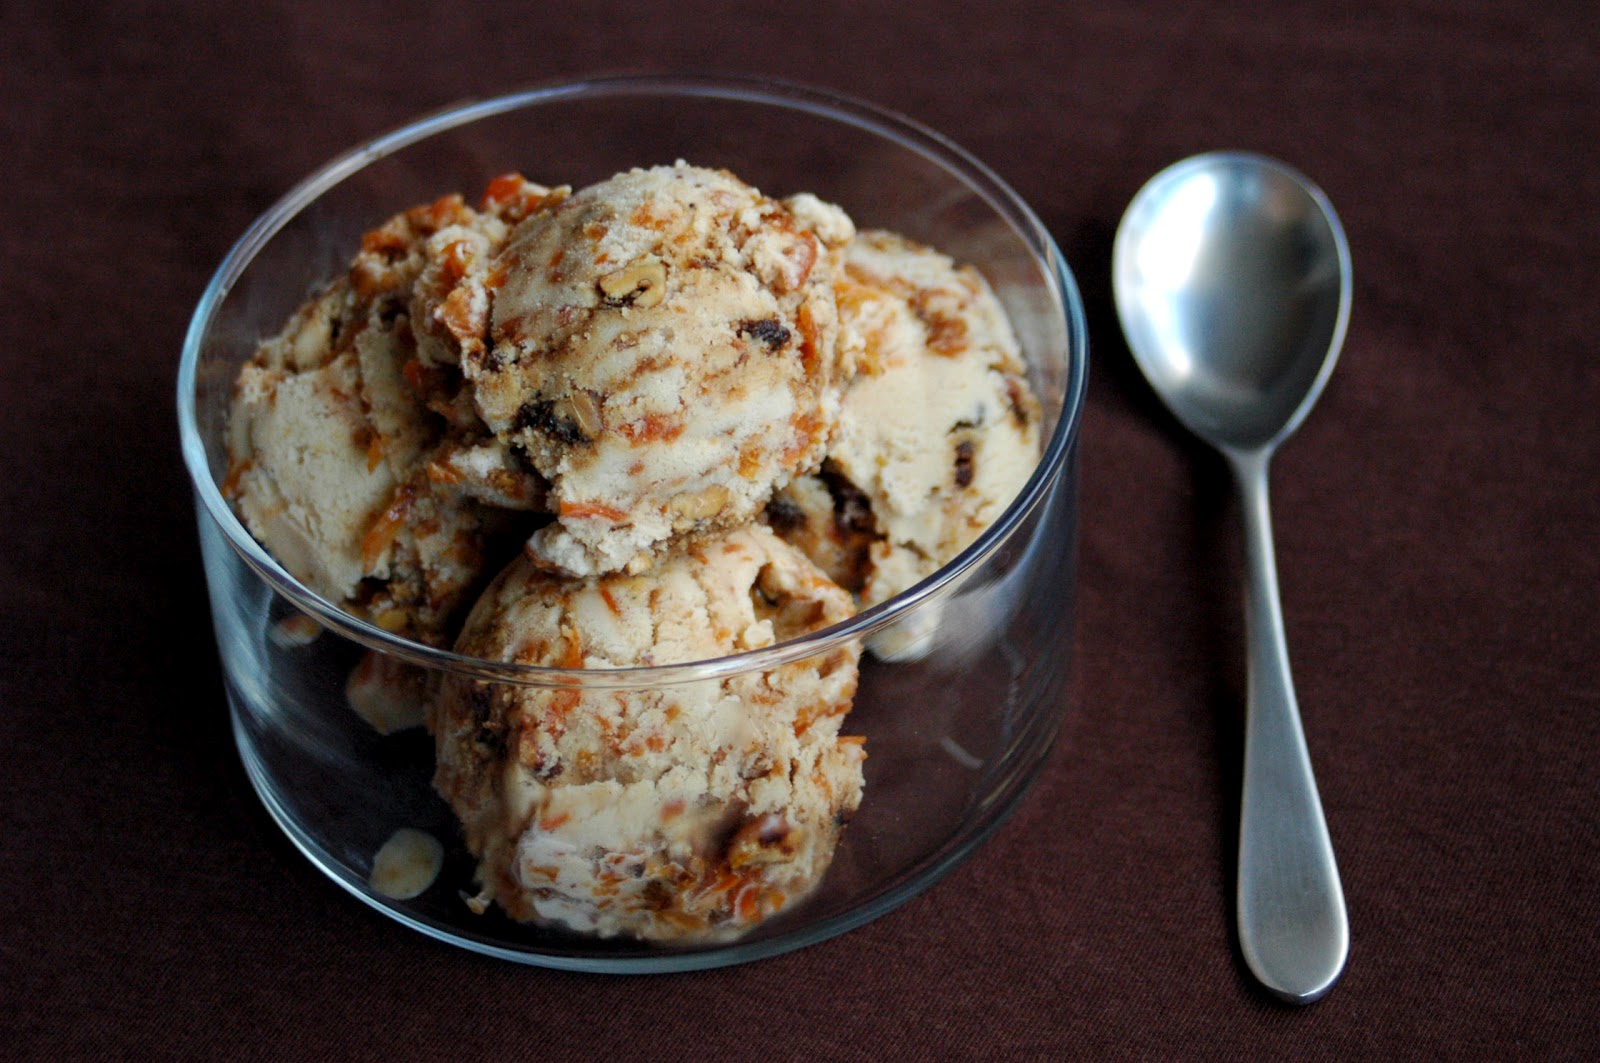 Ice cream Crunchy candied walnuts, rich candied carrots and a buttery tart ice cream base